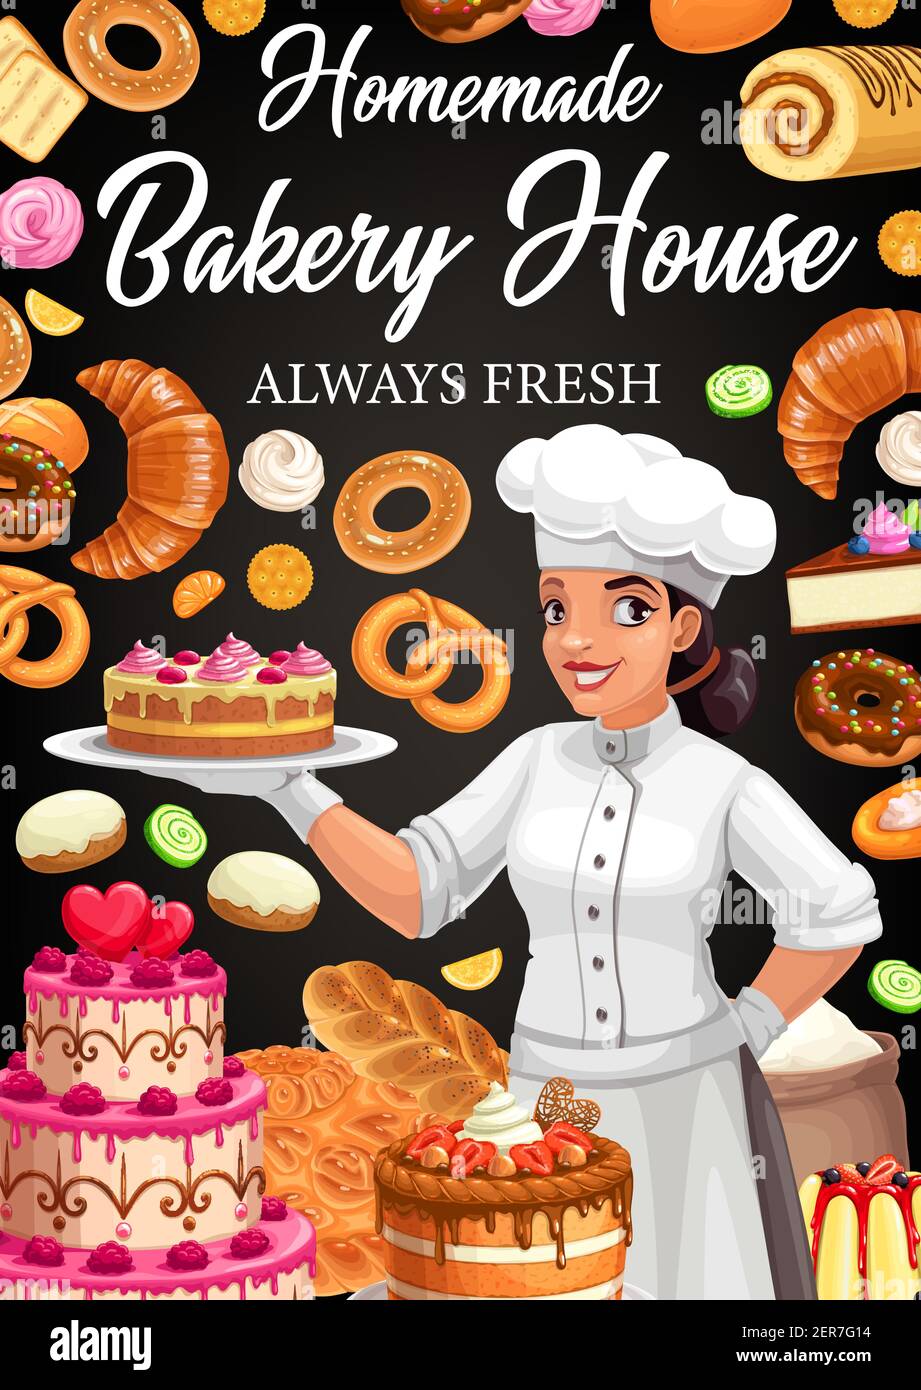 Cake Recipes Tasty Sweets Banner Templates Set With Delicious Desserts  Bakery Confectionery Cake Shop Cafe Design Element Vector Illustration  Stock Illustration - Download Image Now - iStock